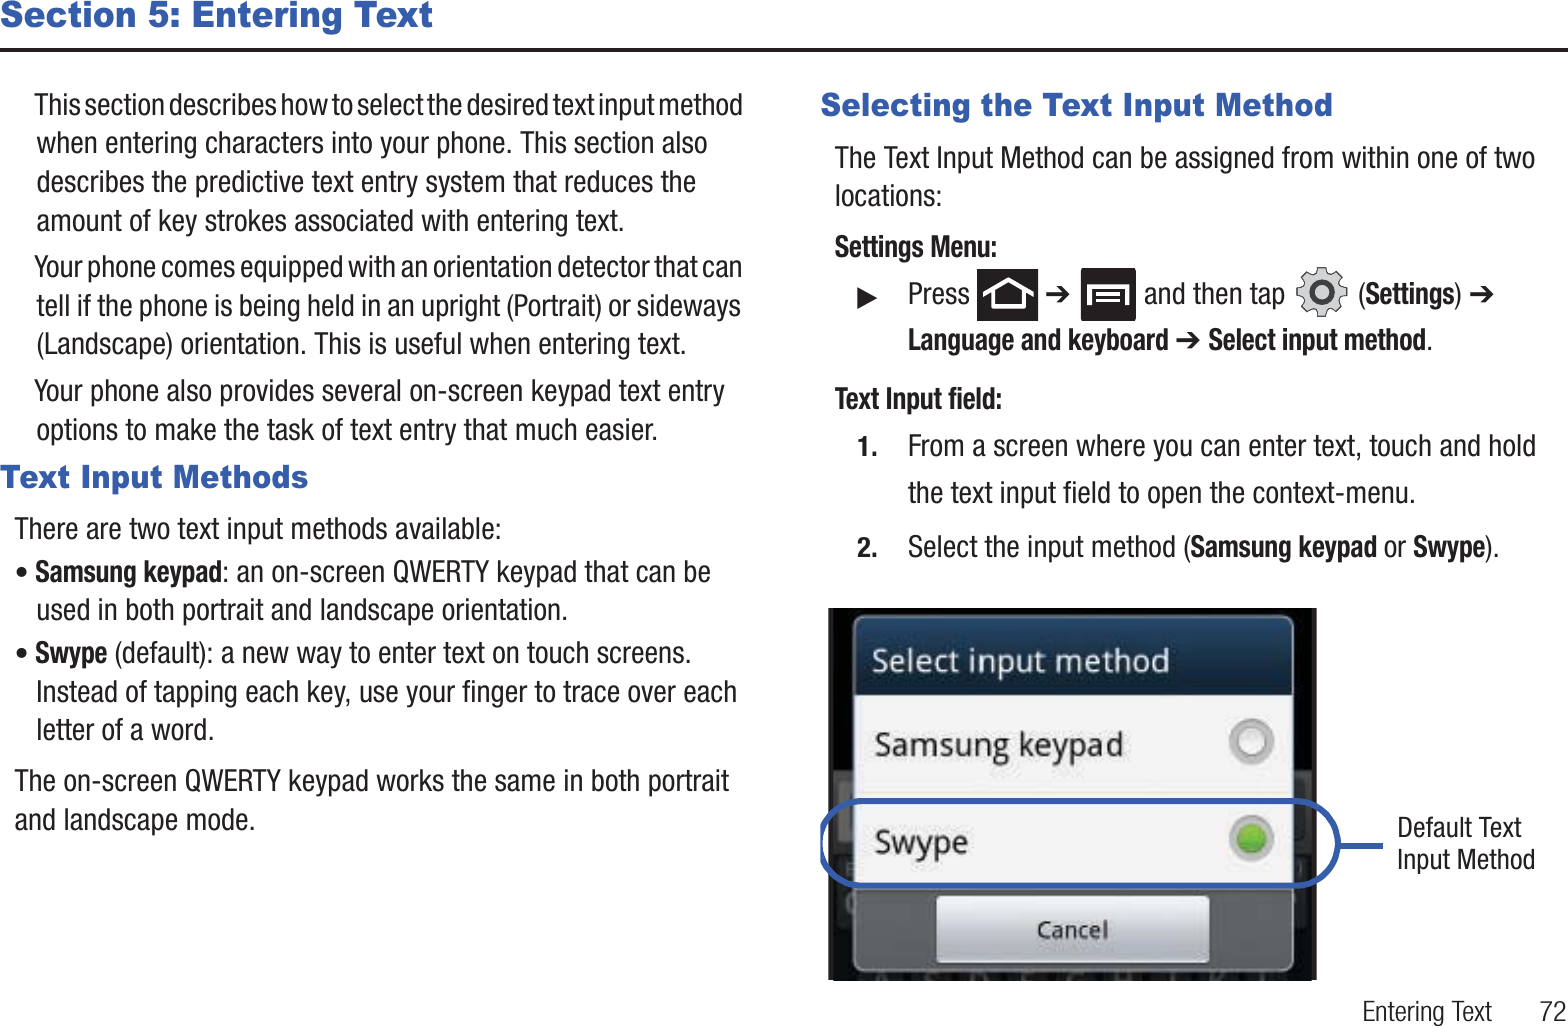 Entering Text       72Section 5: Entering TextThis section describes how to select the desired text input method when entering characters into your phone. This section also describes the predictive text entry system that reduces the amount of key strokes associated with entering text.Your phone comes equipped with an orientation detector that can tell if the phone is being held in an upright (Portrait) or sideways (Landscape) orientation. This is useful when entering text.Your phone also provides several on-screen keypad text entry options to make the task of text entry that much easier.Text Input MethodsThere are two text input methods available:• Samsung keypad: an on-screen QWERTY keypad that can be used in both portrait and landscape orientation.• Swype (default): a new way to enter text on touch screens. Instead of tapping each key, use your finger to trace over each letter of a word.The on-screen QWERTY keypad works the same in both portrait and landscape mode.Selecting the Text Input MethodThe Text Input Method can be assigned from within one of two locations:Settings Menu:䊳Press  ➔   and then tap   (Settings) ➔ Language and keyboard ➔ Select input method.Text Input field:1. From a screen where you can enter text, touch and hold the text input field to open the context-menu.2. Select the input method (Samsung keypad or Swype).   Default TextInput Method